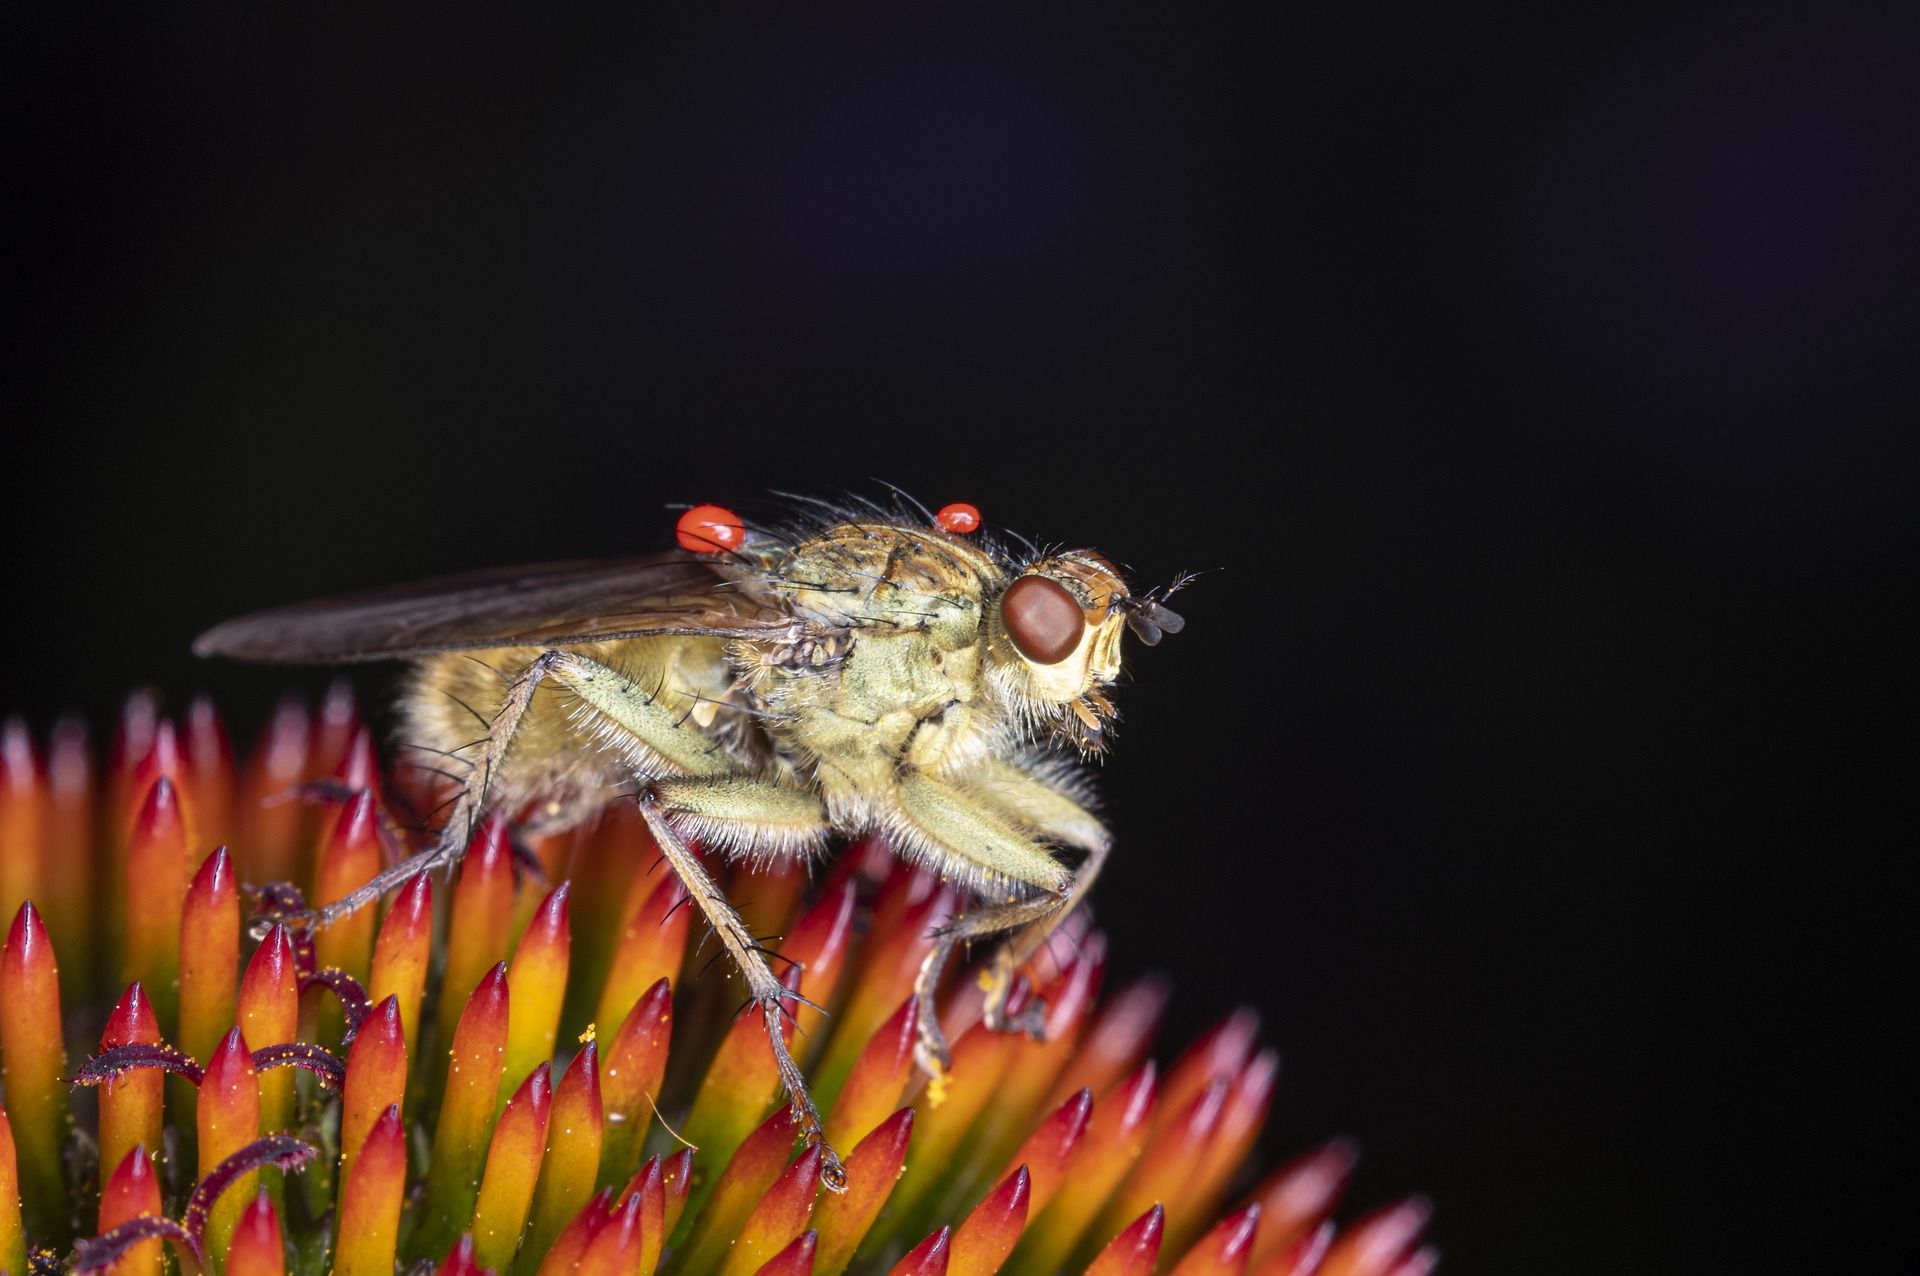 Close Up of a Fly on a Flower HD Wallpaper. Background Image